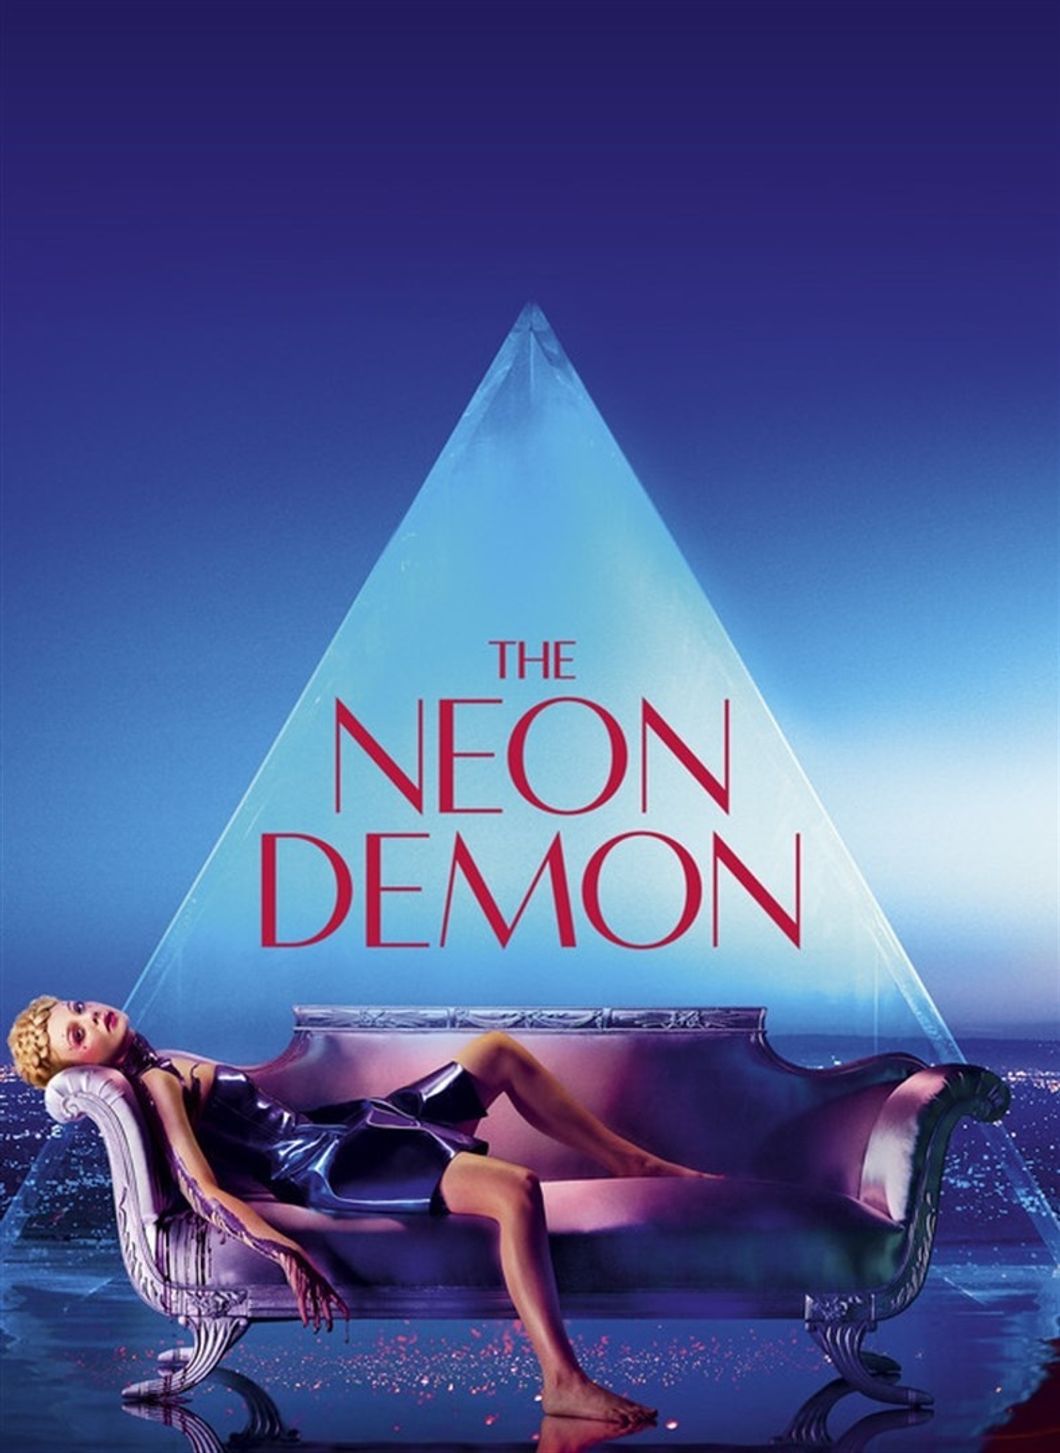 Nicolas Winding Refn's "The Neon Demon" review: ending and symbols explained